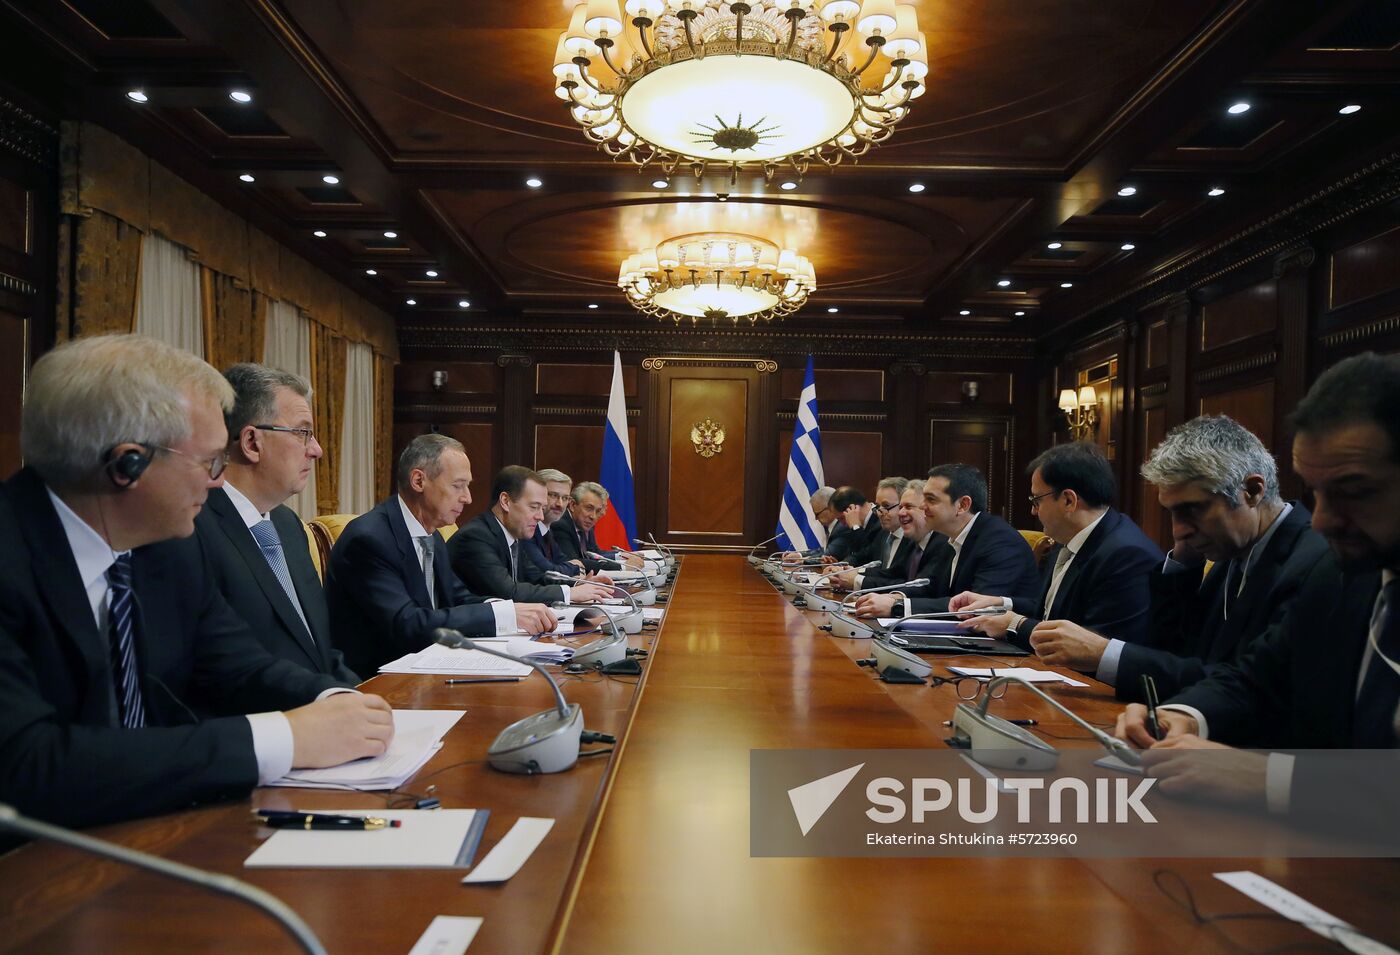 Prime Minister Dmitry Medvedev meets with Prime Minister of Grees Alexis Tsipras